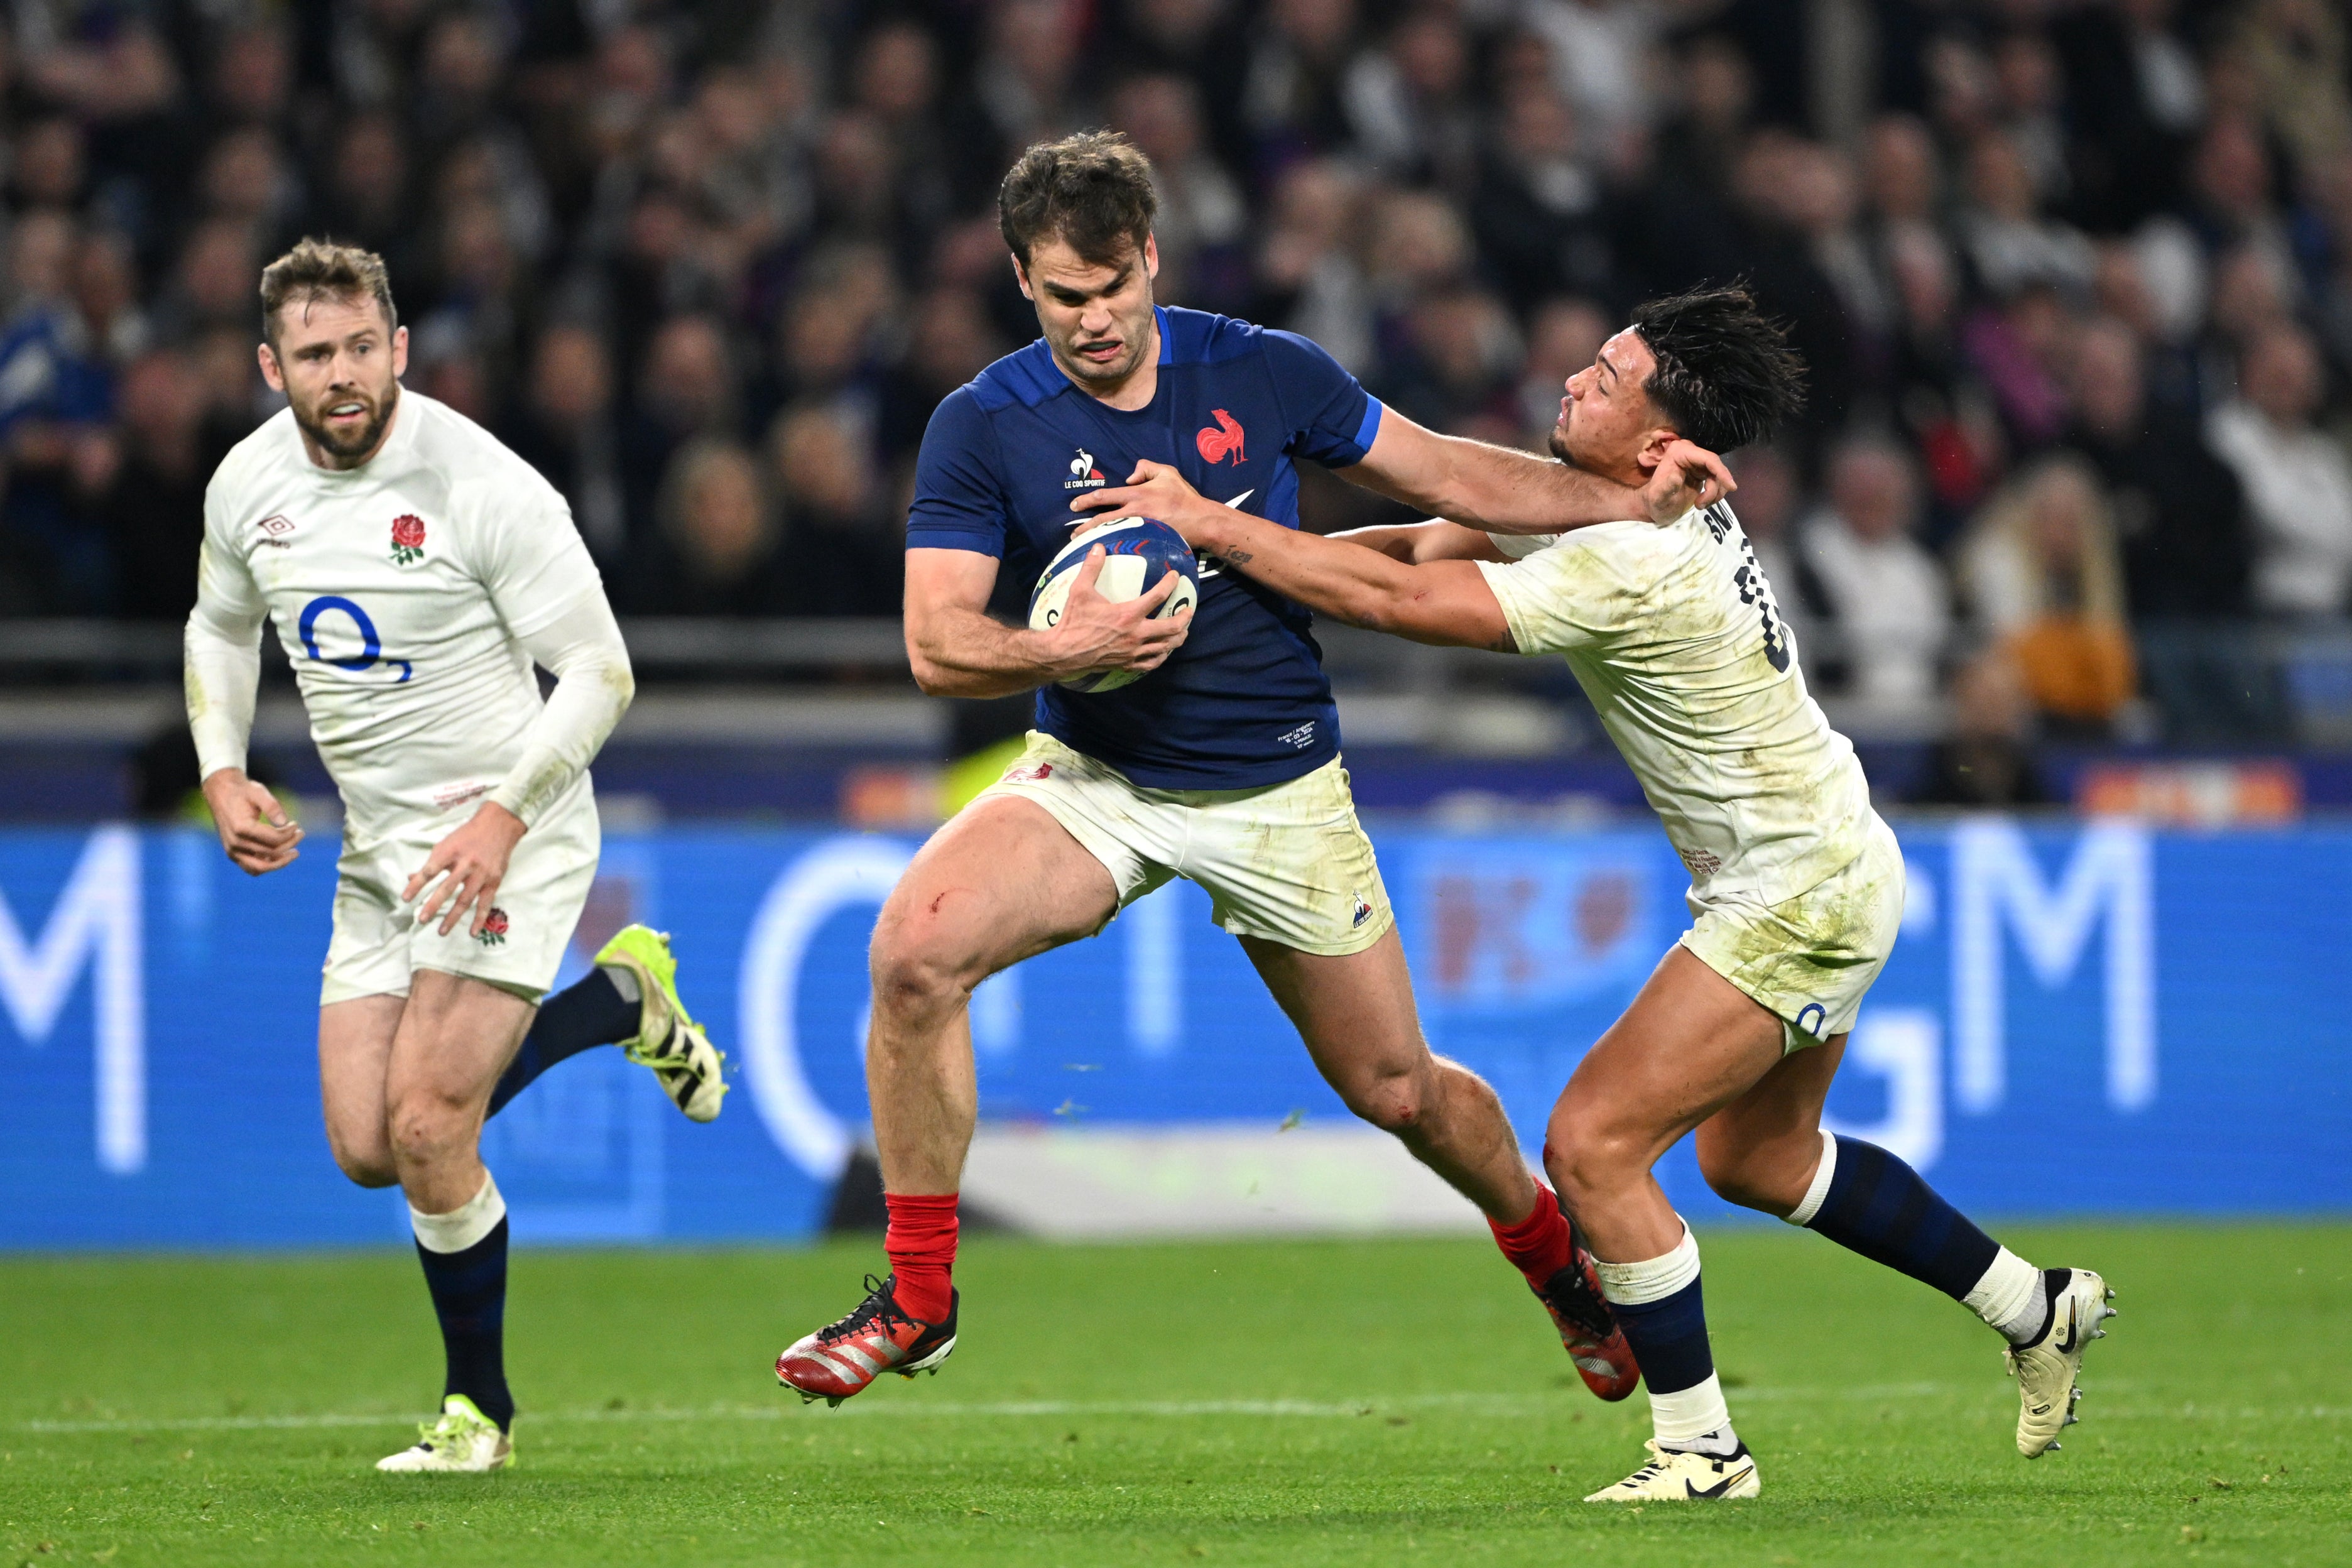 England faced a France side packed with physicality